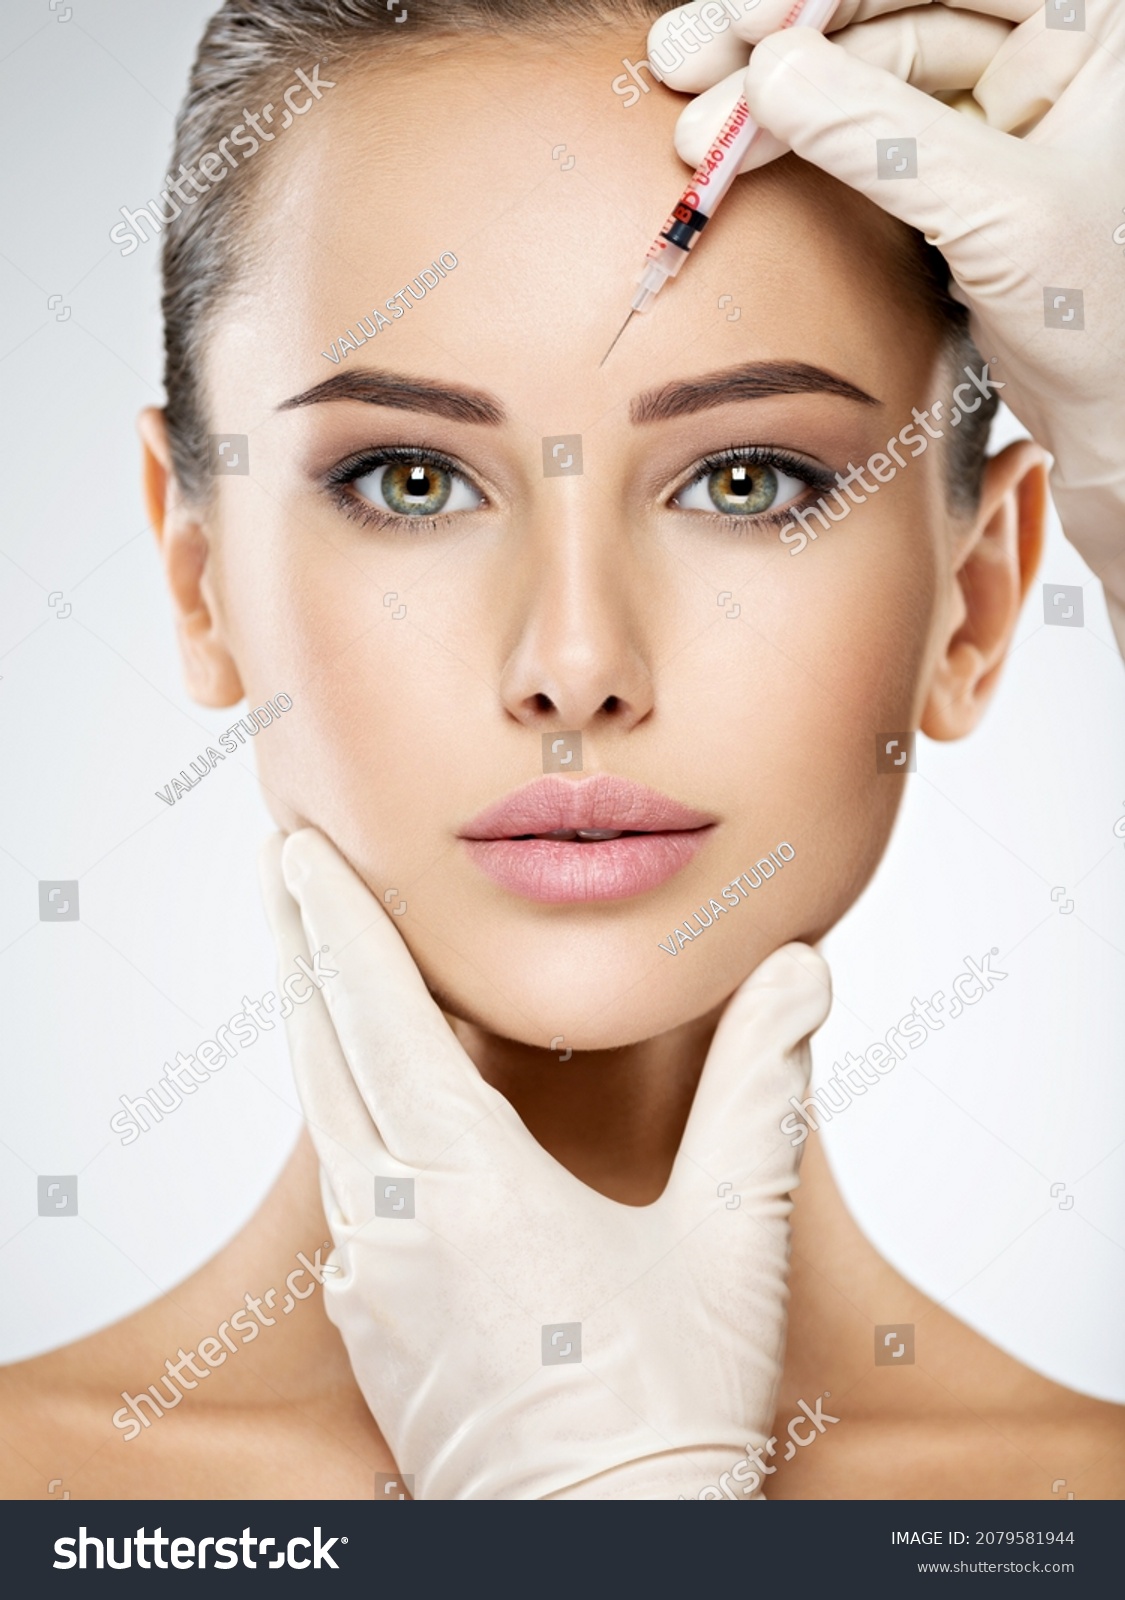 Portrait of young Caucasian woman getting botox cosmetic injection in forehead. Beautiful woman gets botox injection in her face. #2079581944